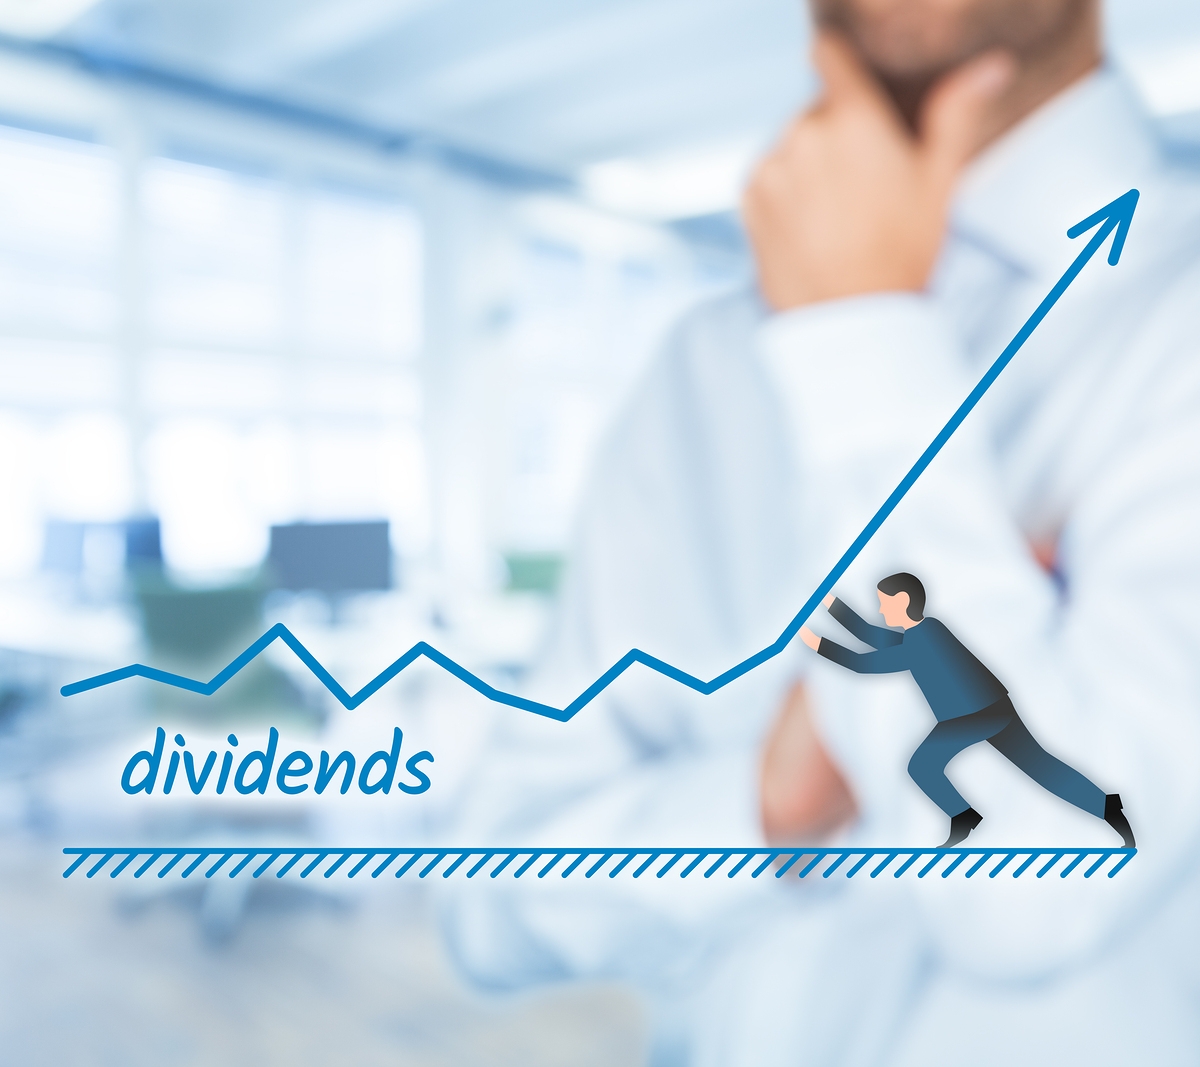 dividends-and-franking-credits-venture-private-advisory